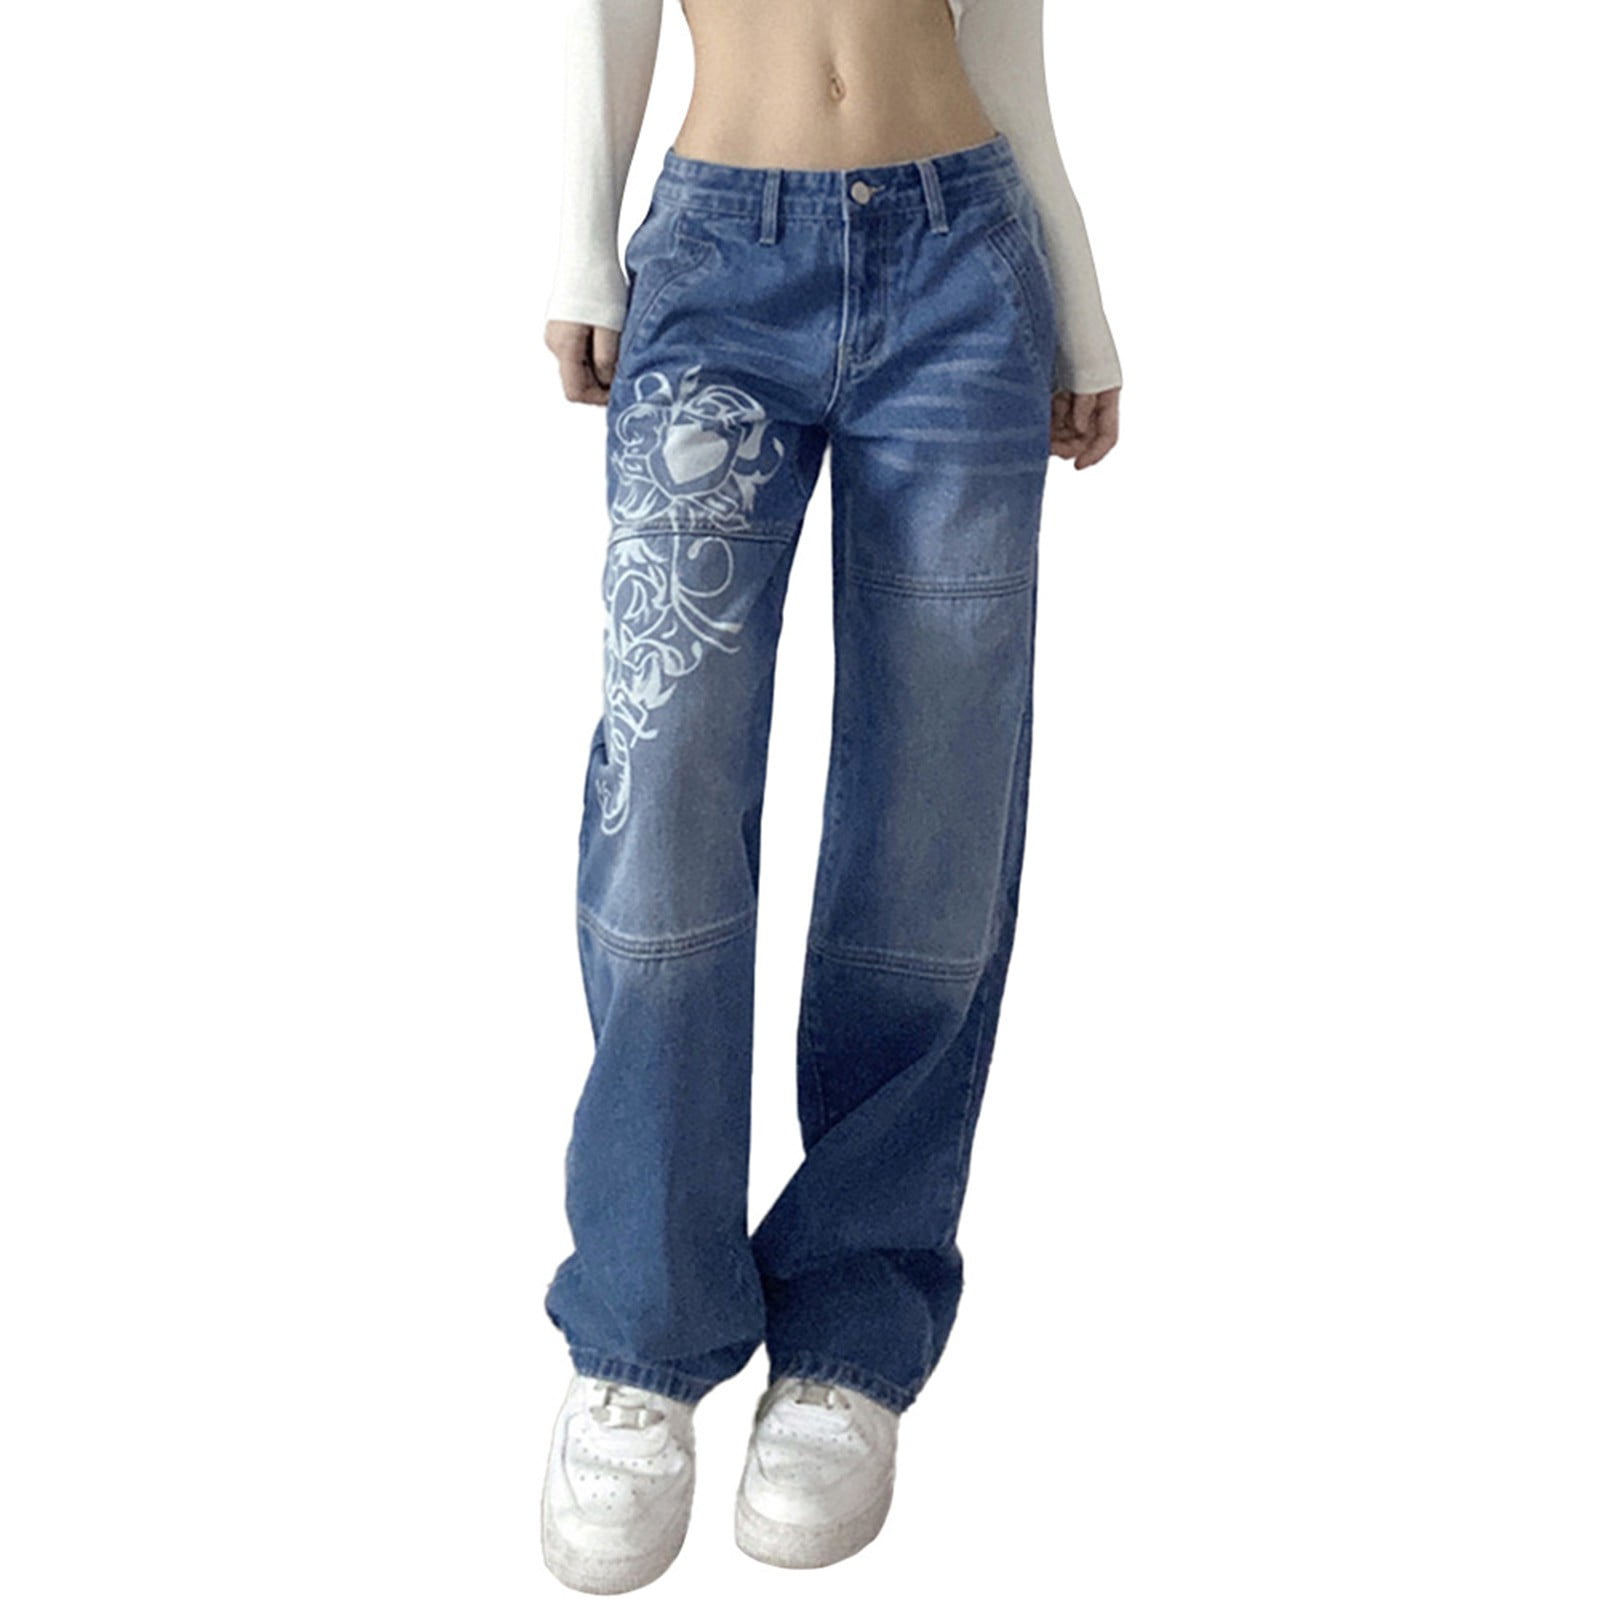 Y2K Low Rise Jeans With Graphic Printing, Wide Legs, Straight Legs